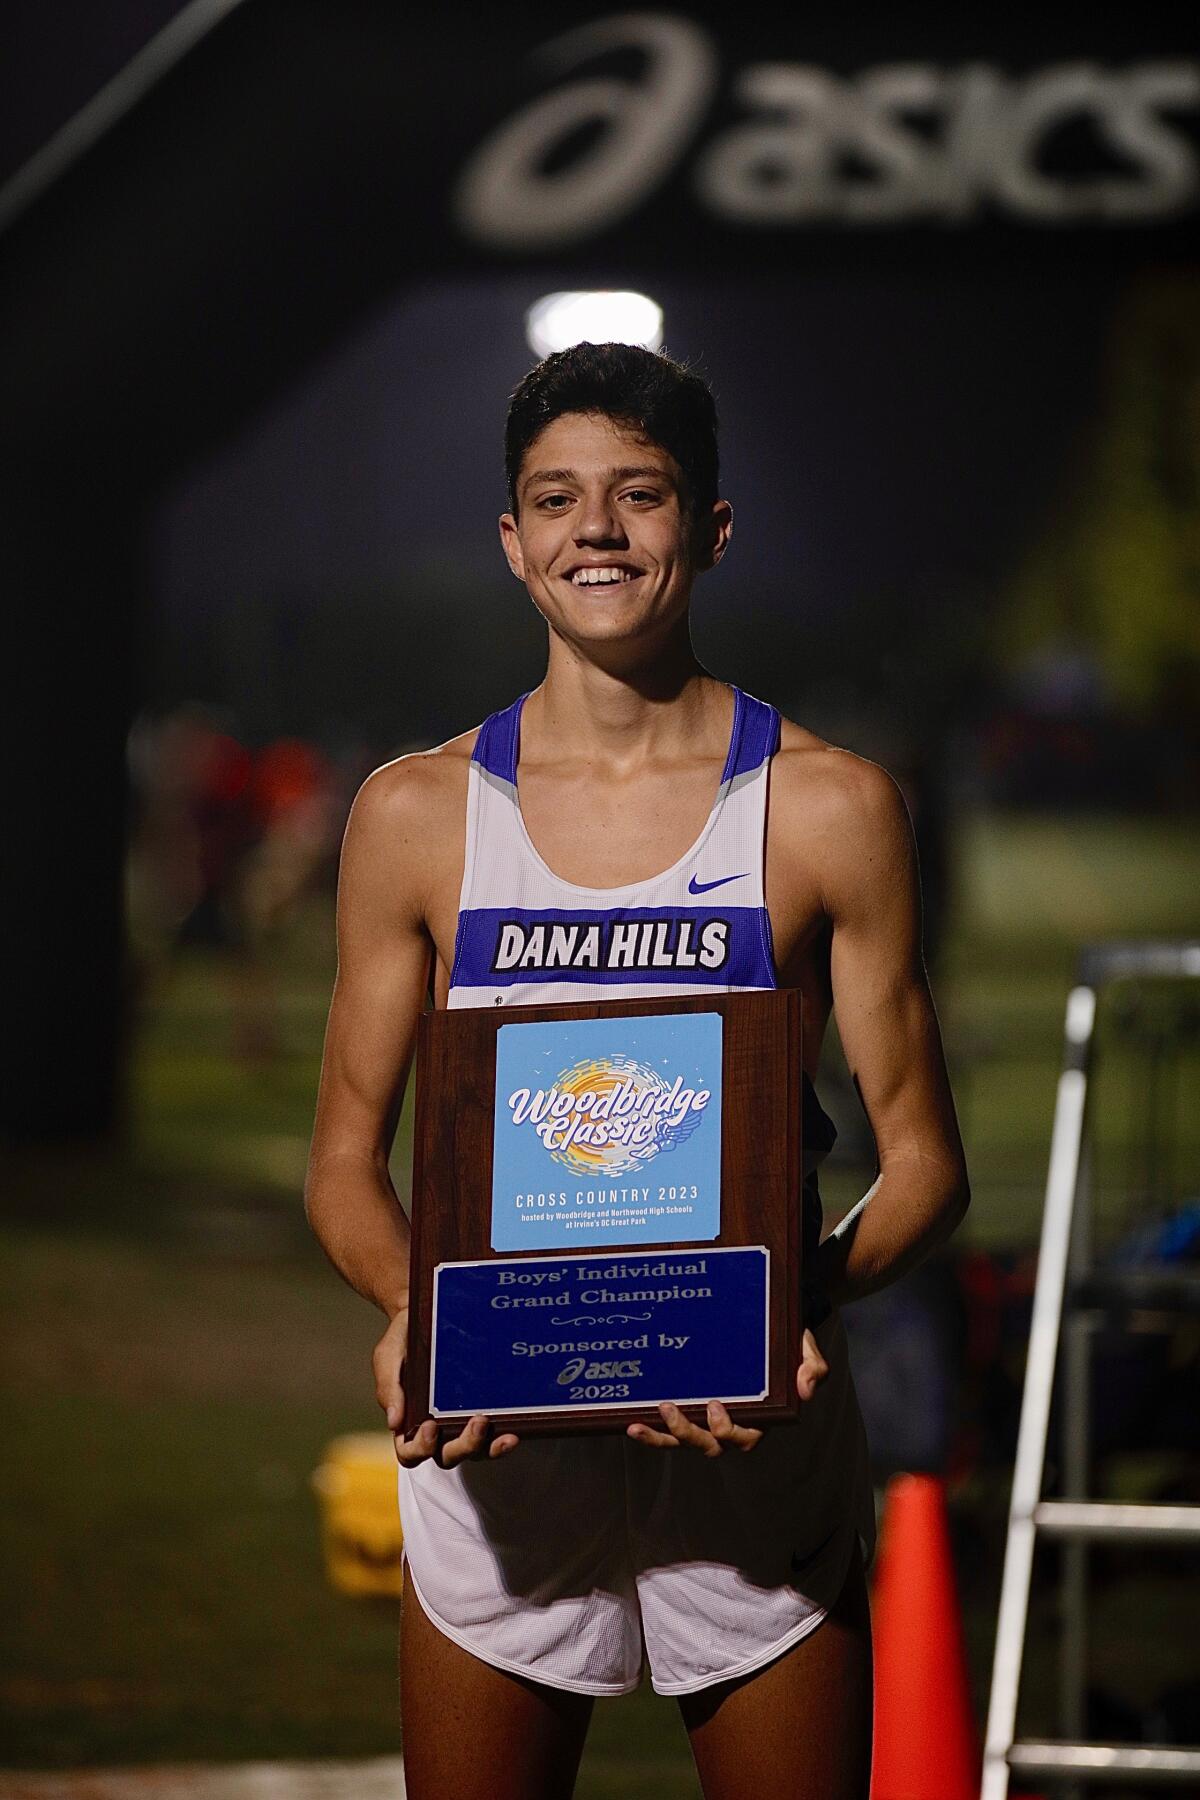 Evan Noonan of Dana Hills High won the boys' aweepstakes race in 13:41.3 at the Woodbridge Classic on Saturday in Irvine.